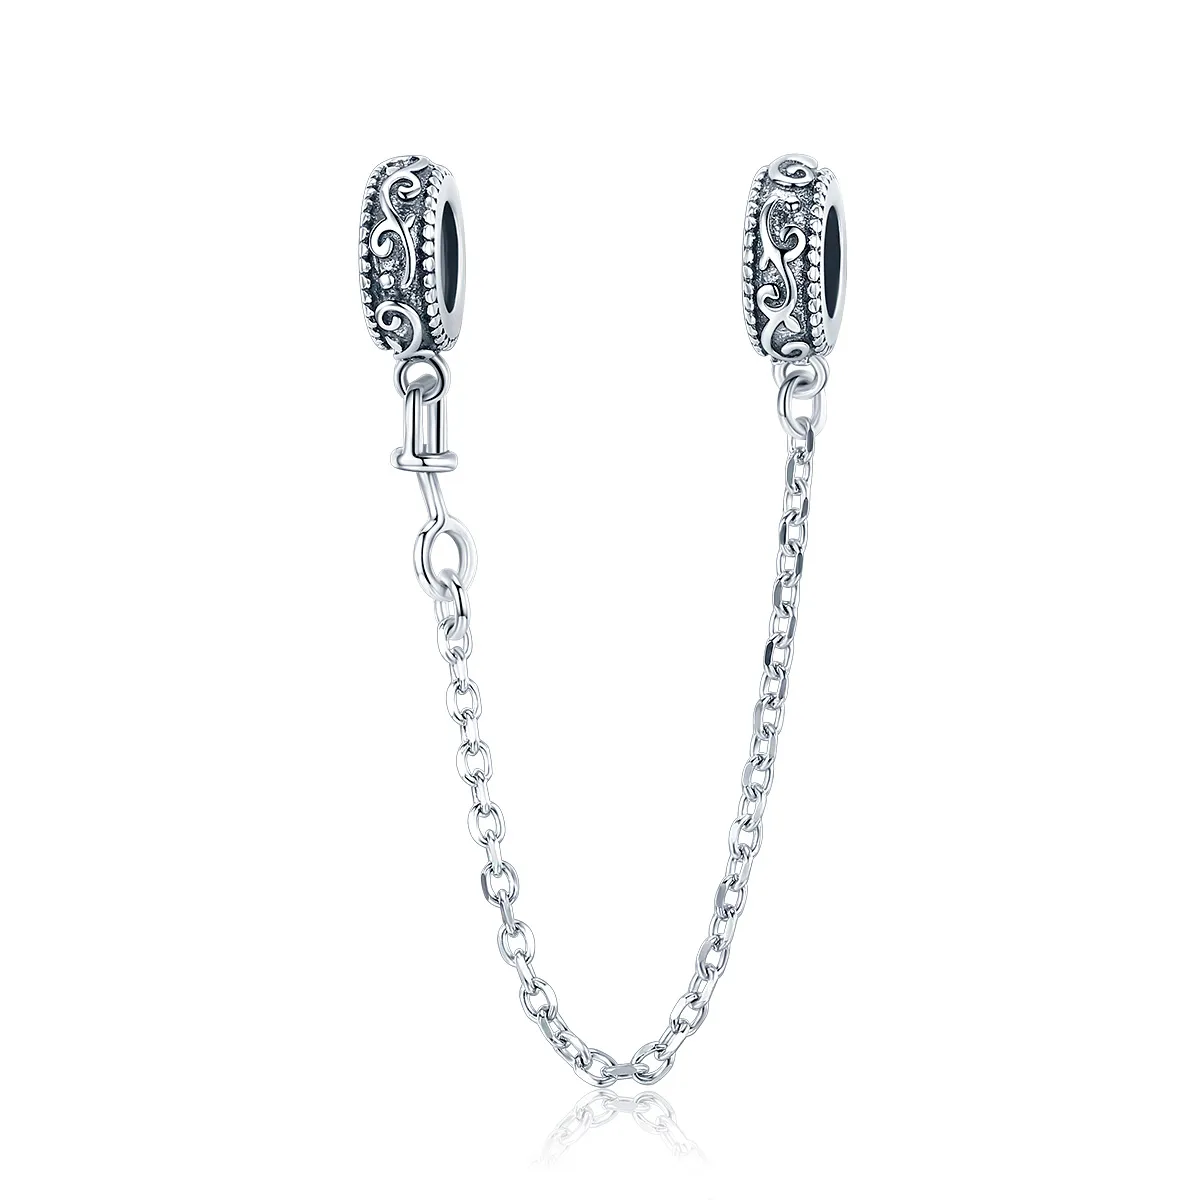 Pandora Style Silver Classical Vine Safety Chain - SCC1546